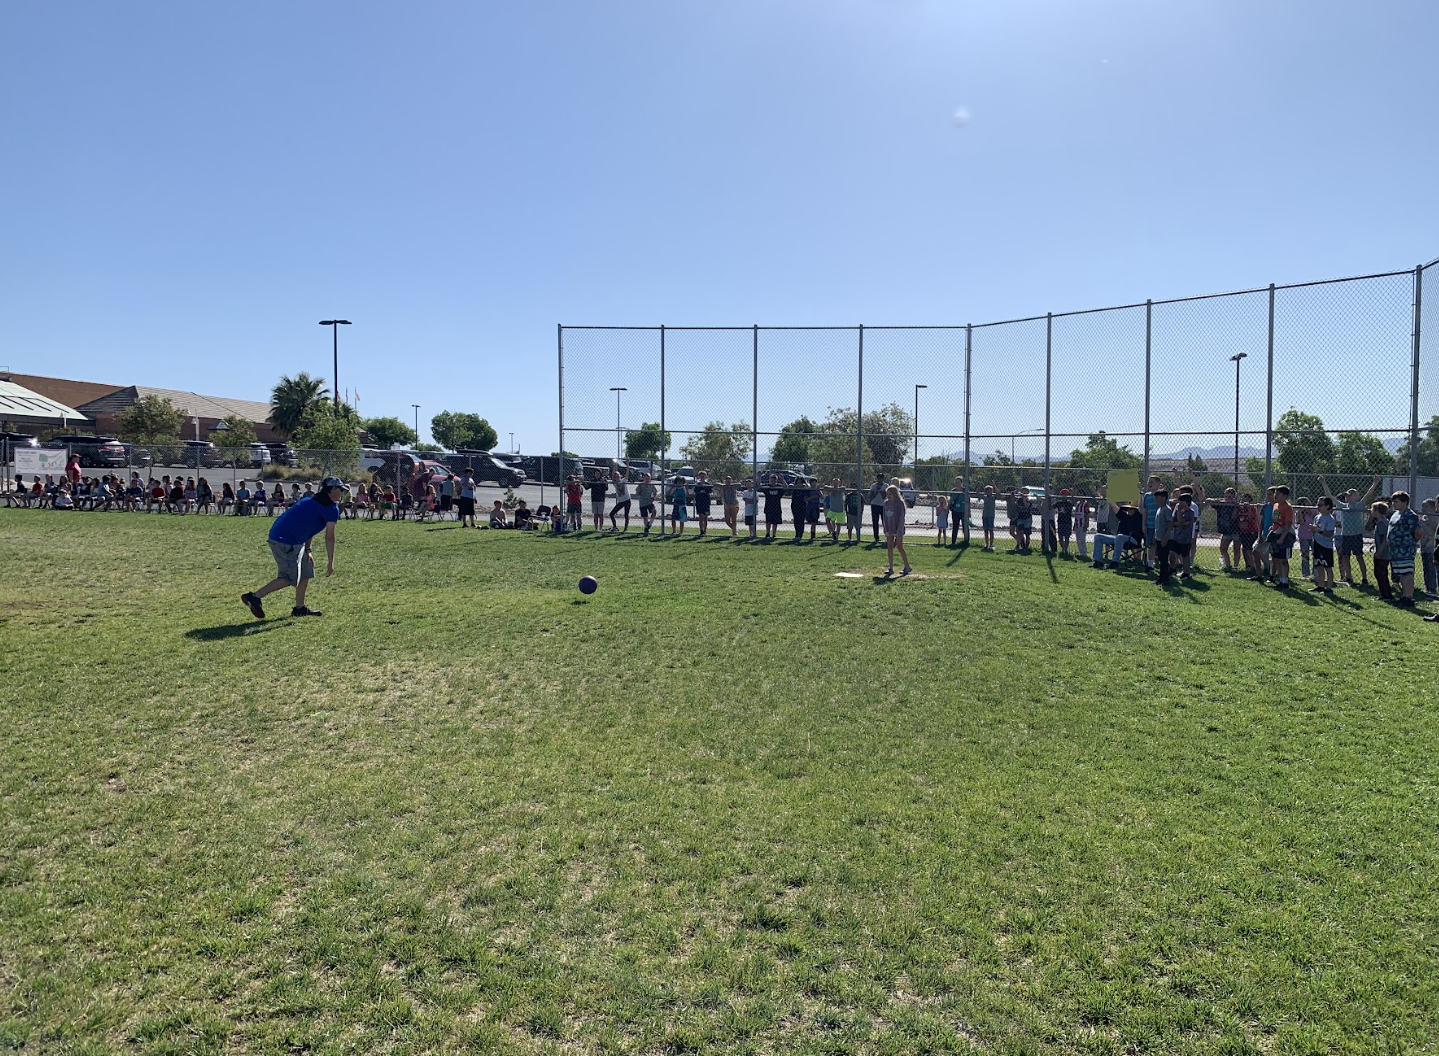 A 5th grader getting ready to kick the ball during the 5th grade vs staff kickball game.